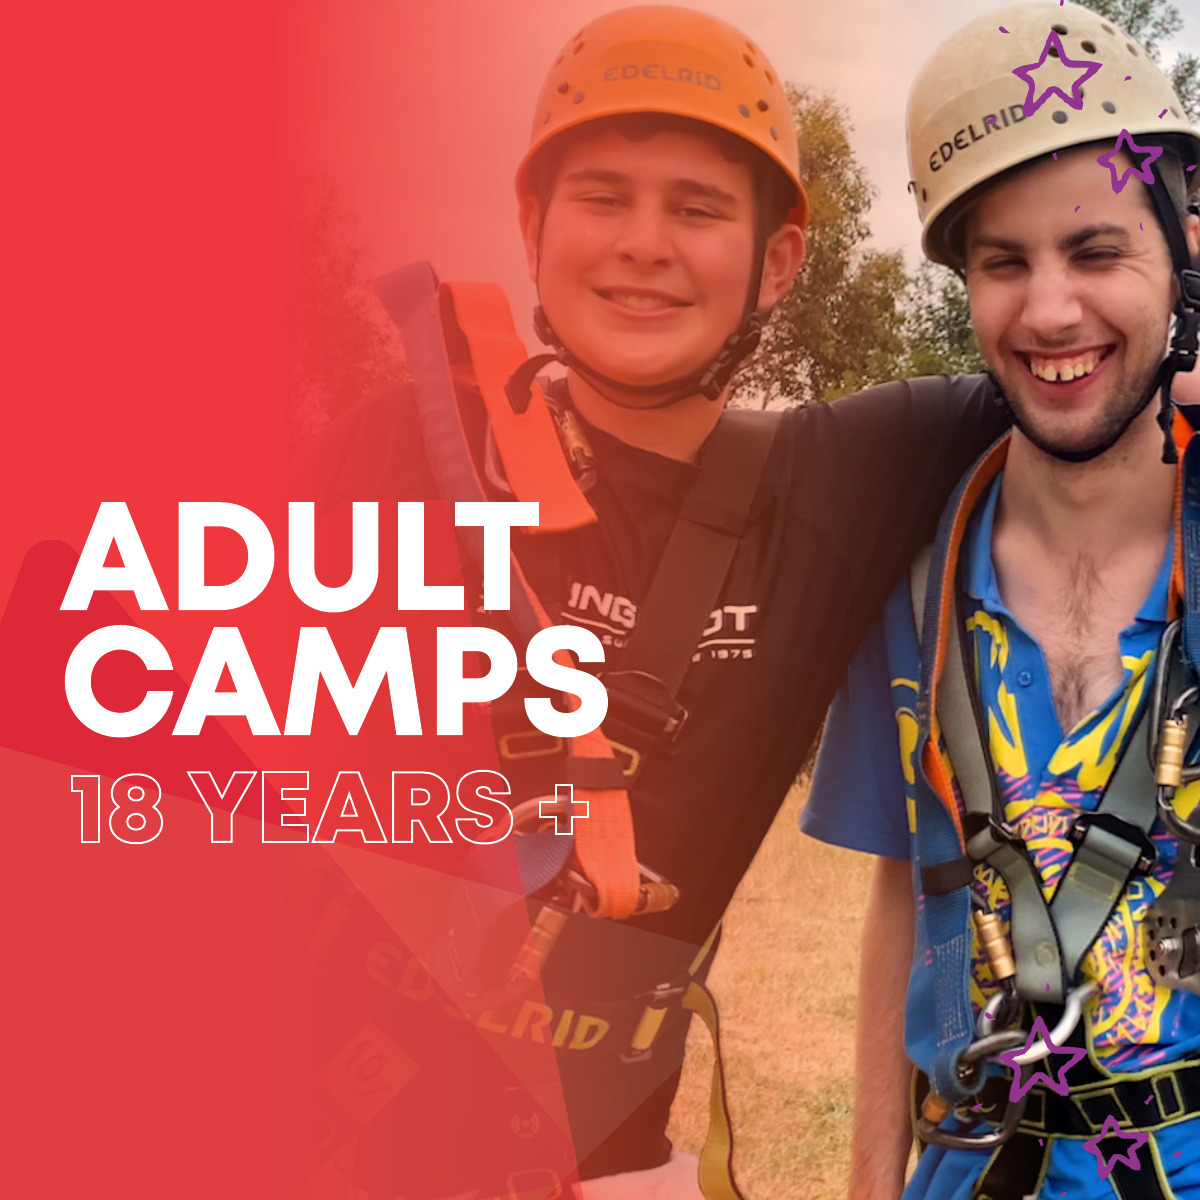 Adult camps 18 years +